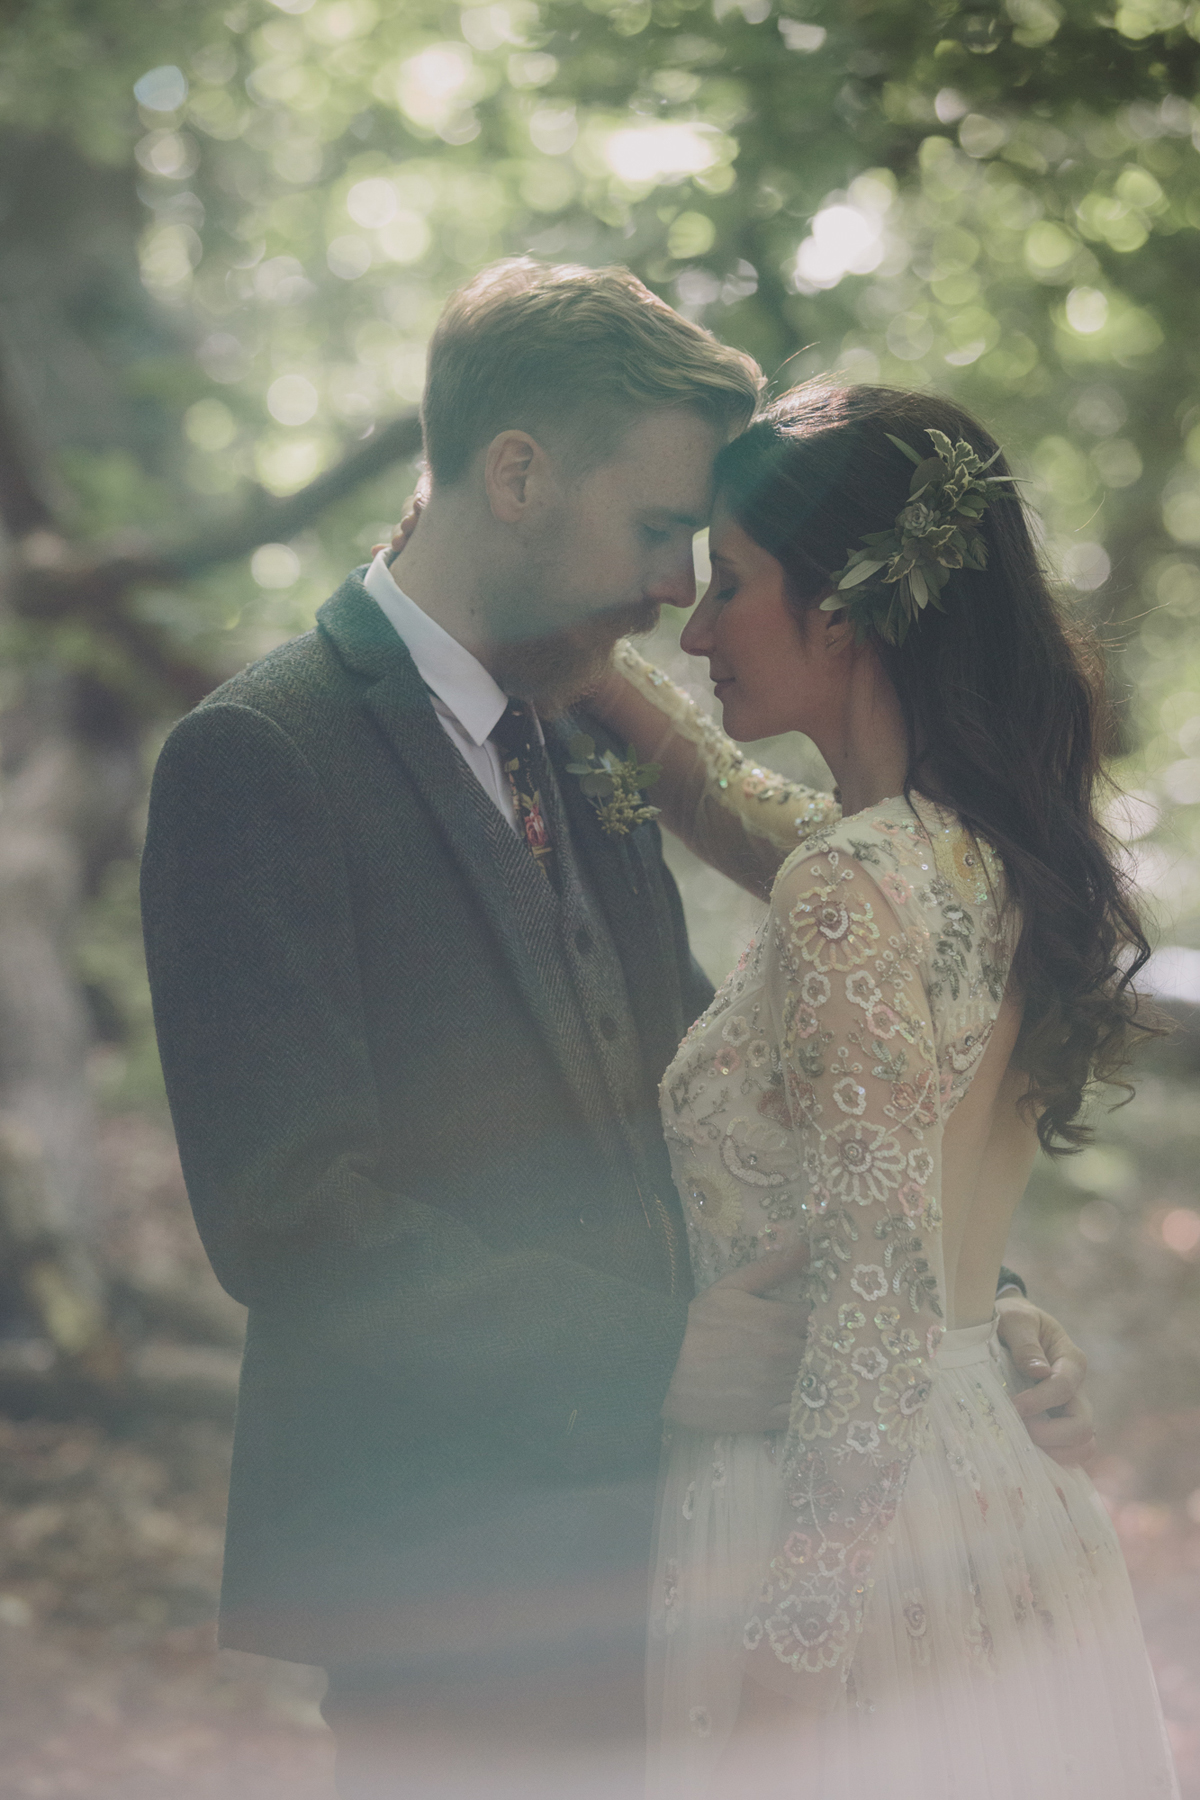 68 Bride in a Needle Thread gown and a Groom with a handlebar moustache and ASOS suit standing in woodland image by McKinley Rodgers